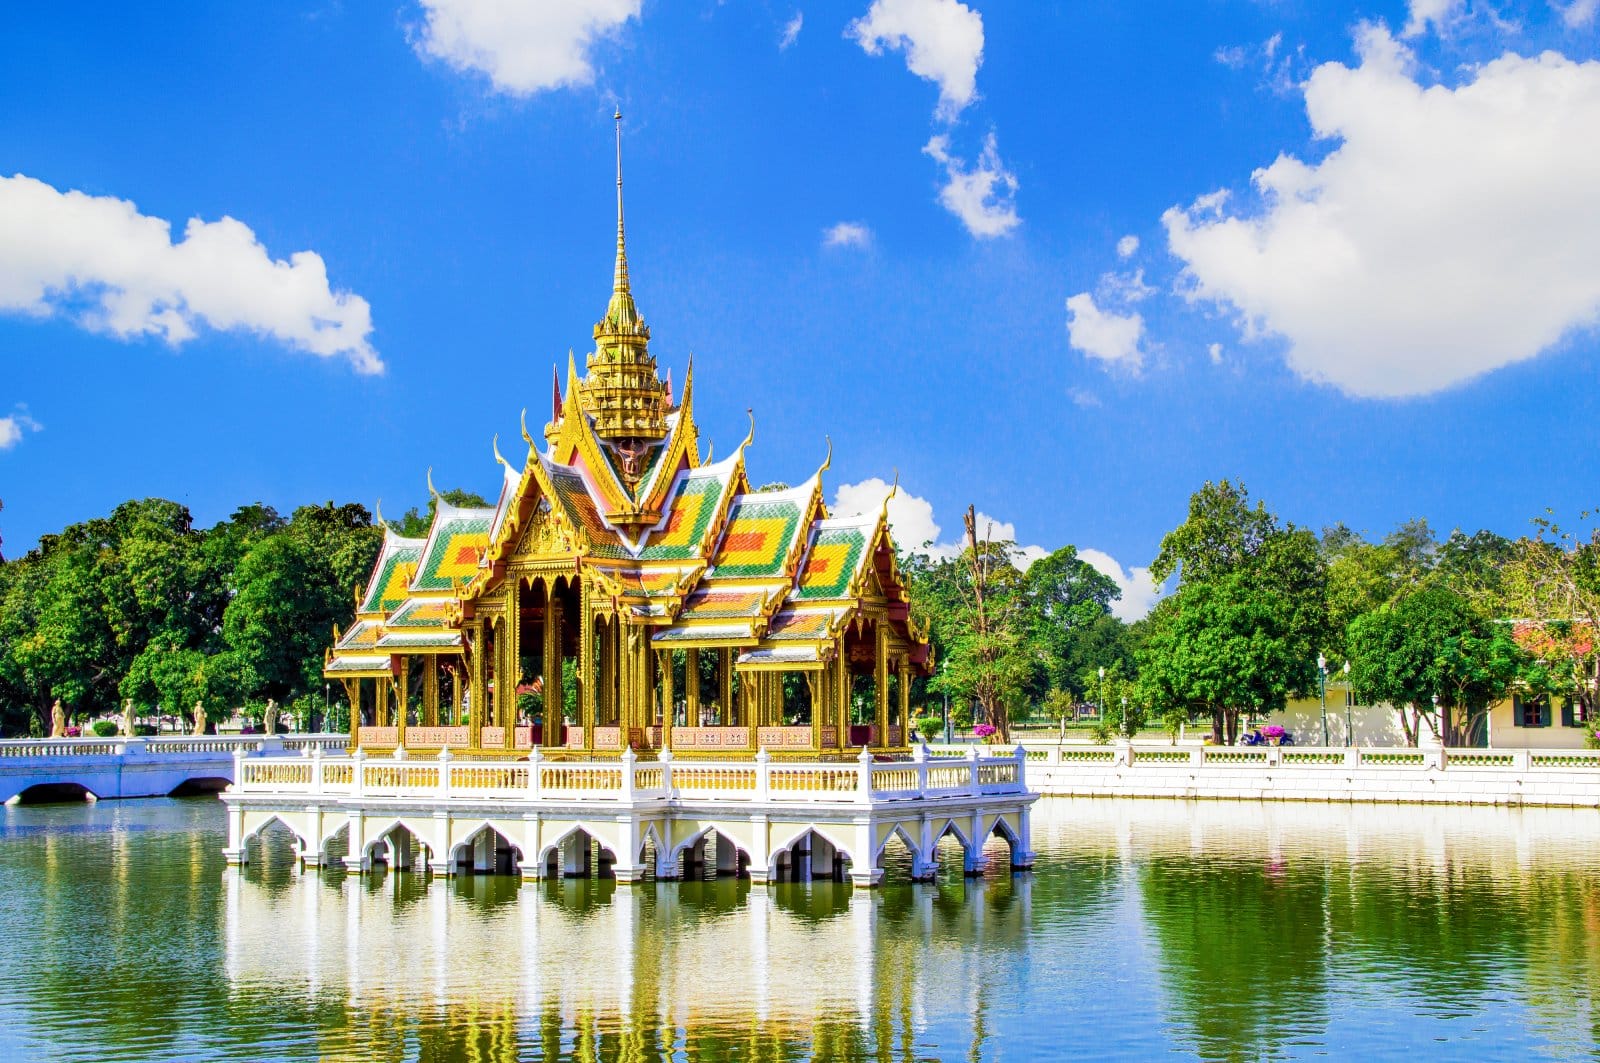 <p class="wp-caption-text">Image Credit: Shutterstock / AofLine</p>  <p>The Royal Summer Palace, Bang Pa-In, highlights Thailand’s royal heritage, blending Thai, Chinese, and Gothic architectural styles since its 17th-century origins and 19th-century expansion by King Chulalongkorn (Rama V). This complex features diverse structures like the traditional Thai Aisawan Thiphya-Art Pavilion and the Chinese-style Wehart Chamrun mansion, surrounded by meticulously designed gardens. These elements reflect the Thai monarchy’s global influences and commitment to cultural preservation amidst modernization. Today, Bang Pa-In serves both as a royal retreat and a cultural attraction, symbolizing Thailand’s rich history and its balance of tradition and modernity.</p>